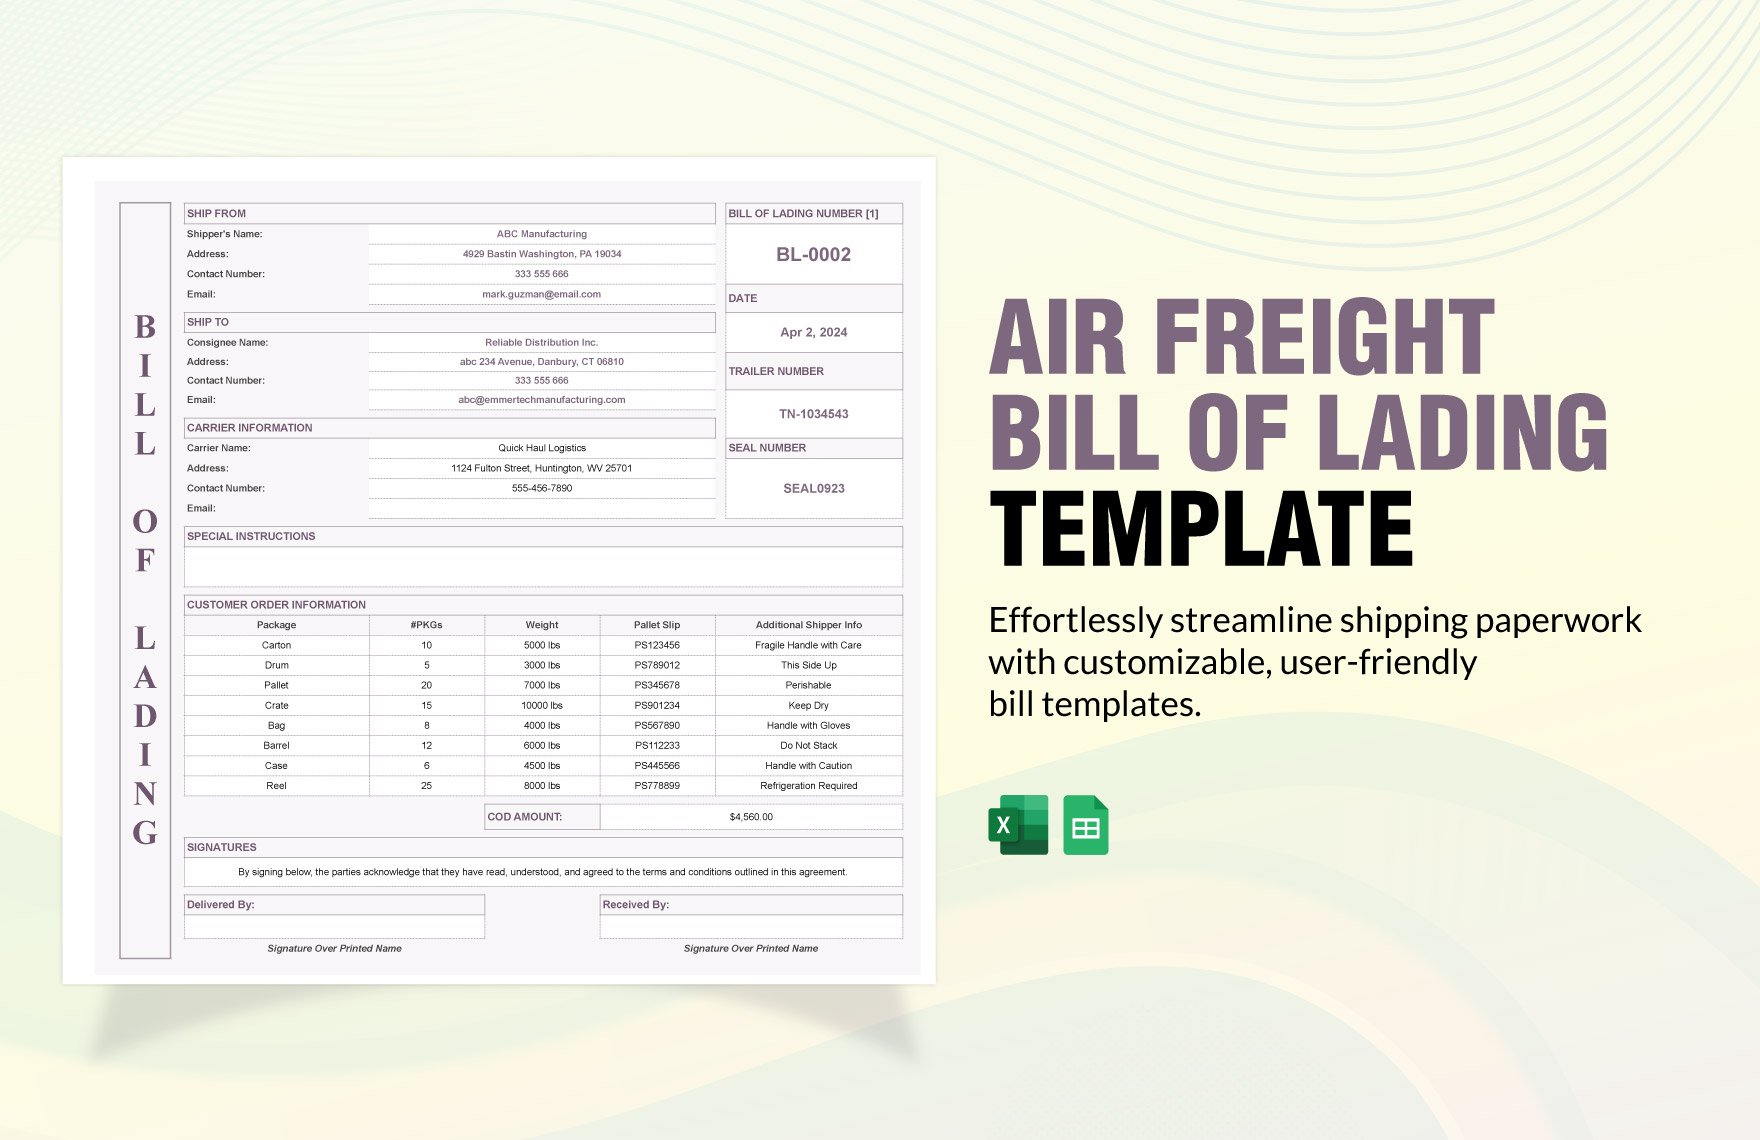 Air Freight Bill of Lading Template